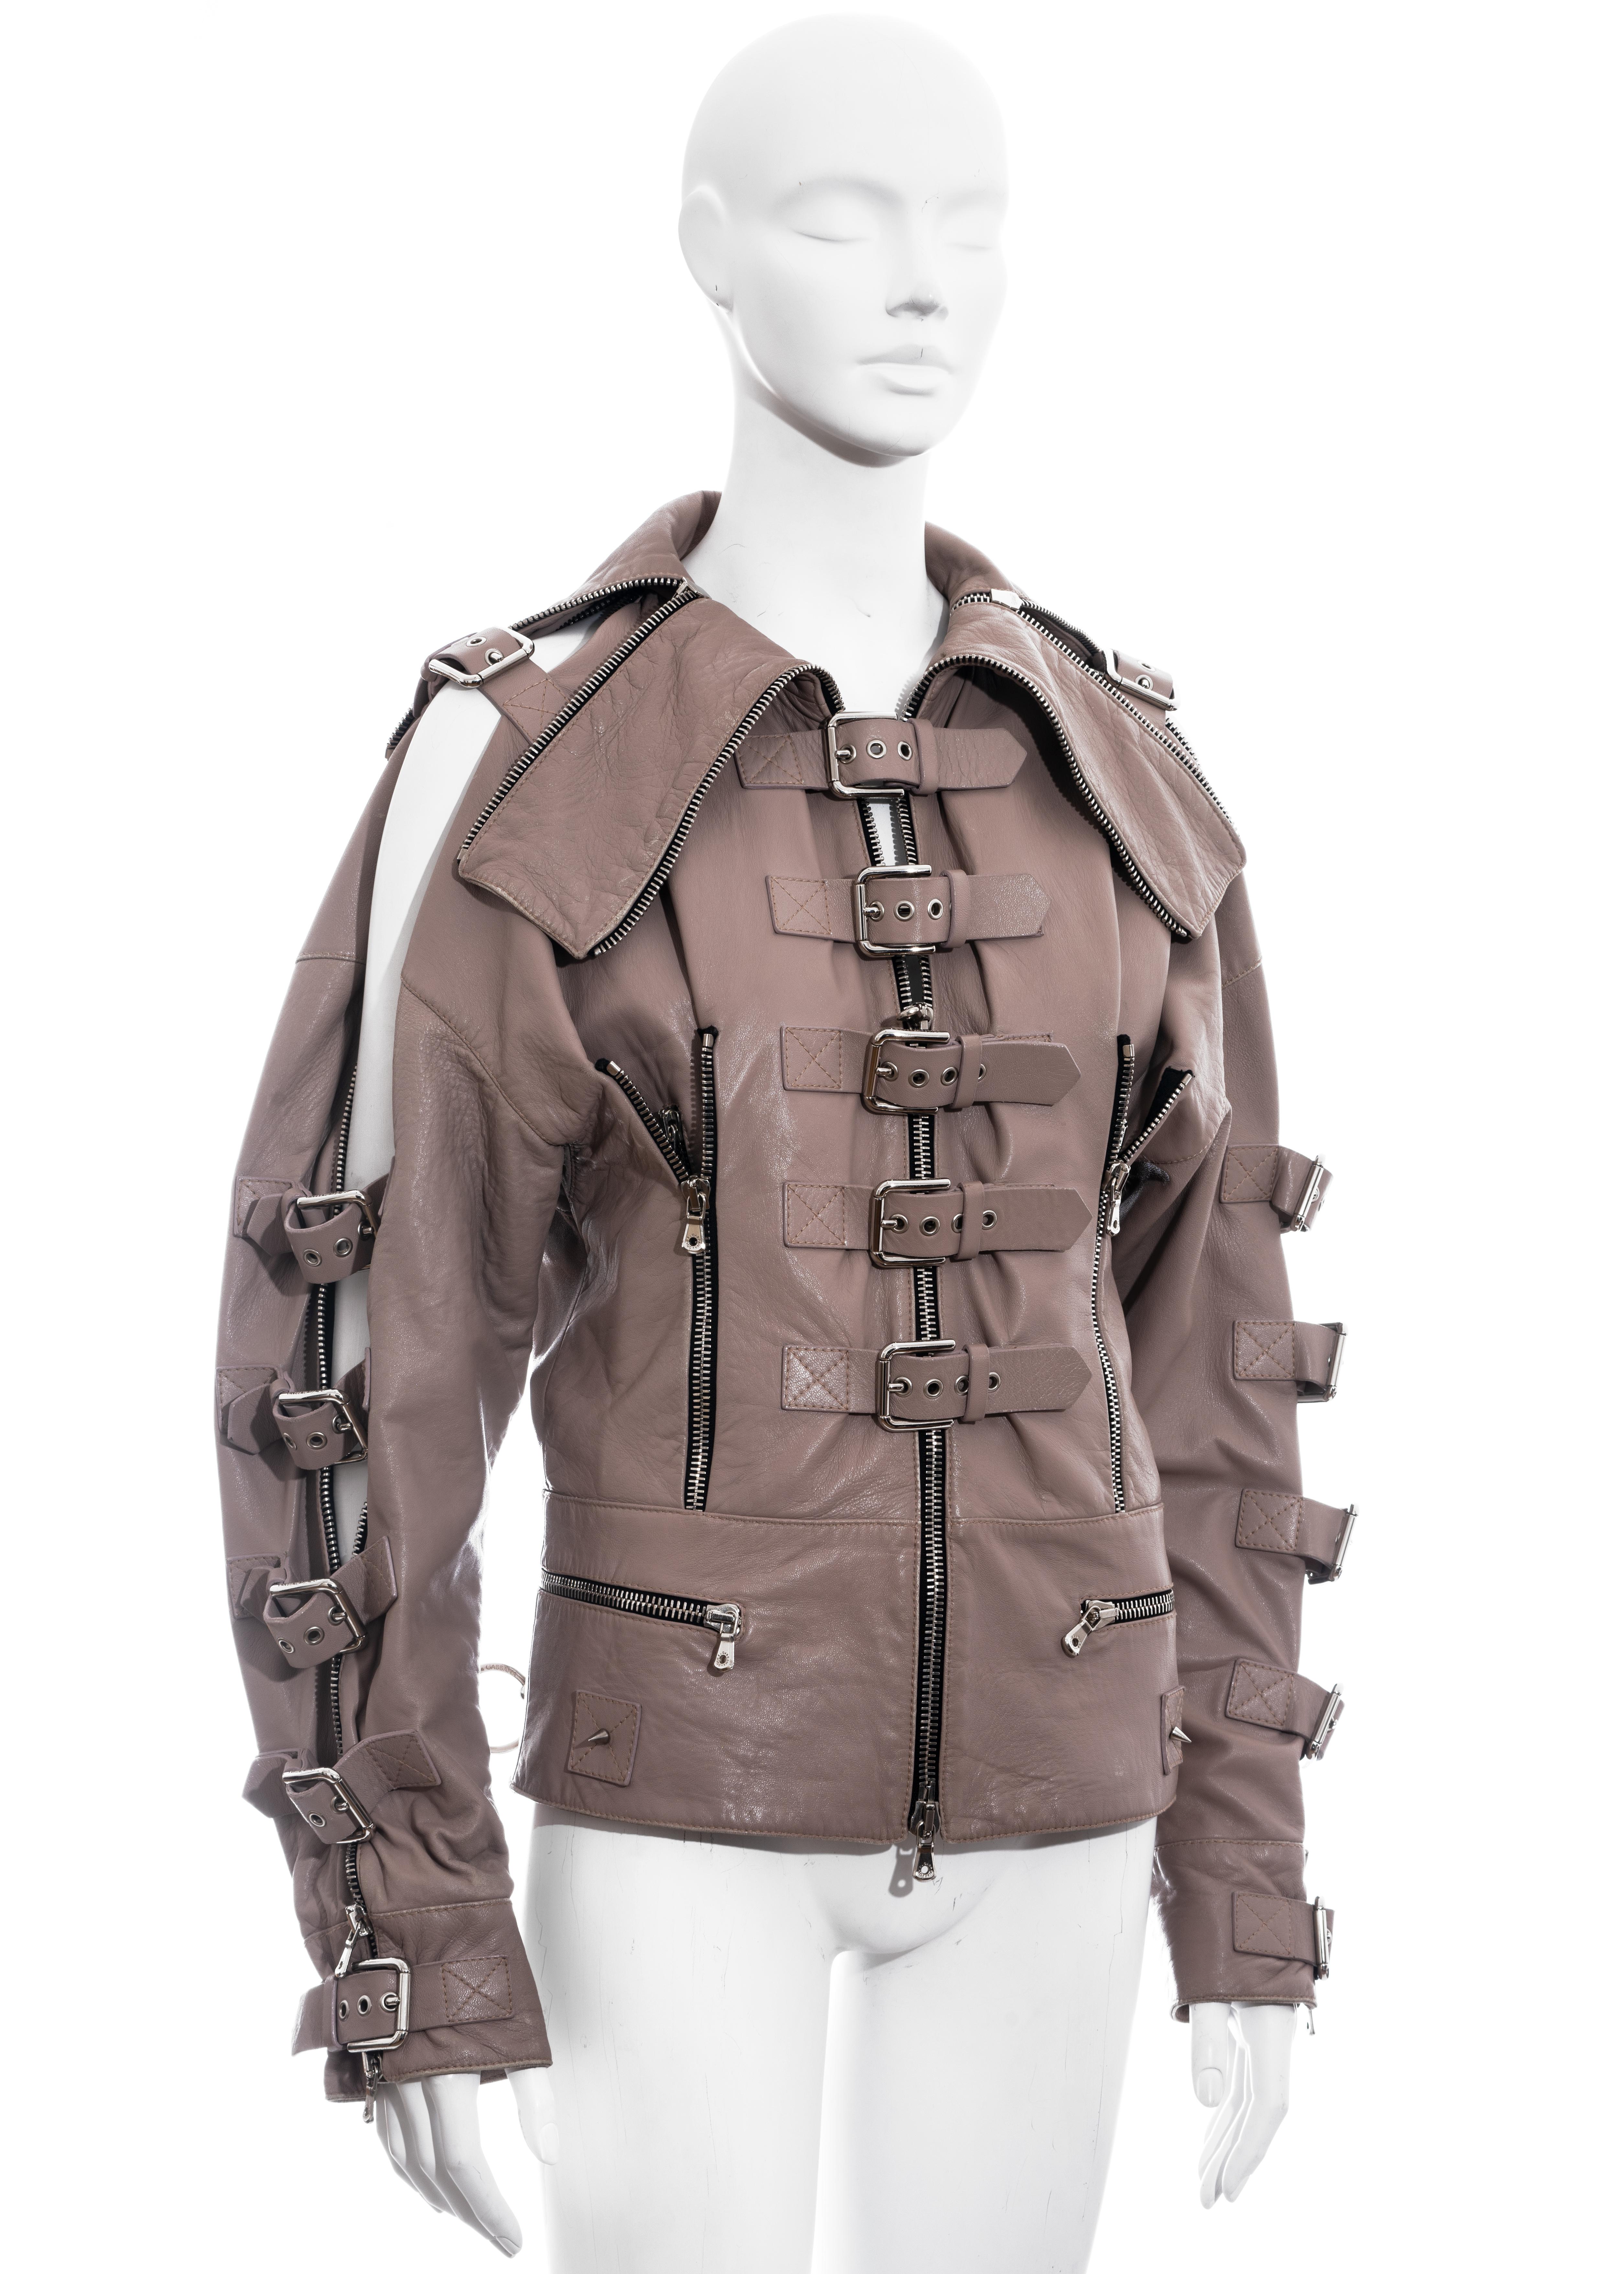 ▪ Dolce & Gabbana mauve leather bondage jacket
▪ 100% Lambskin Leather
▪ Metal zip fastenings on sleeves, collar, back and front
▪ Seventeen metal buckles 
▪ Silk lining 
▪ IT 38 - FR 34 - UK 6 - US 2
▪ Spring-Summer 2003
